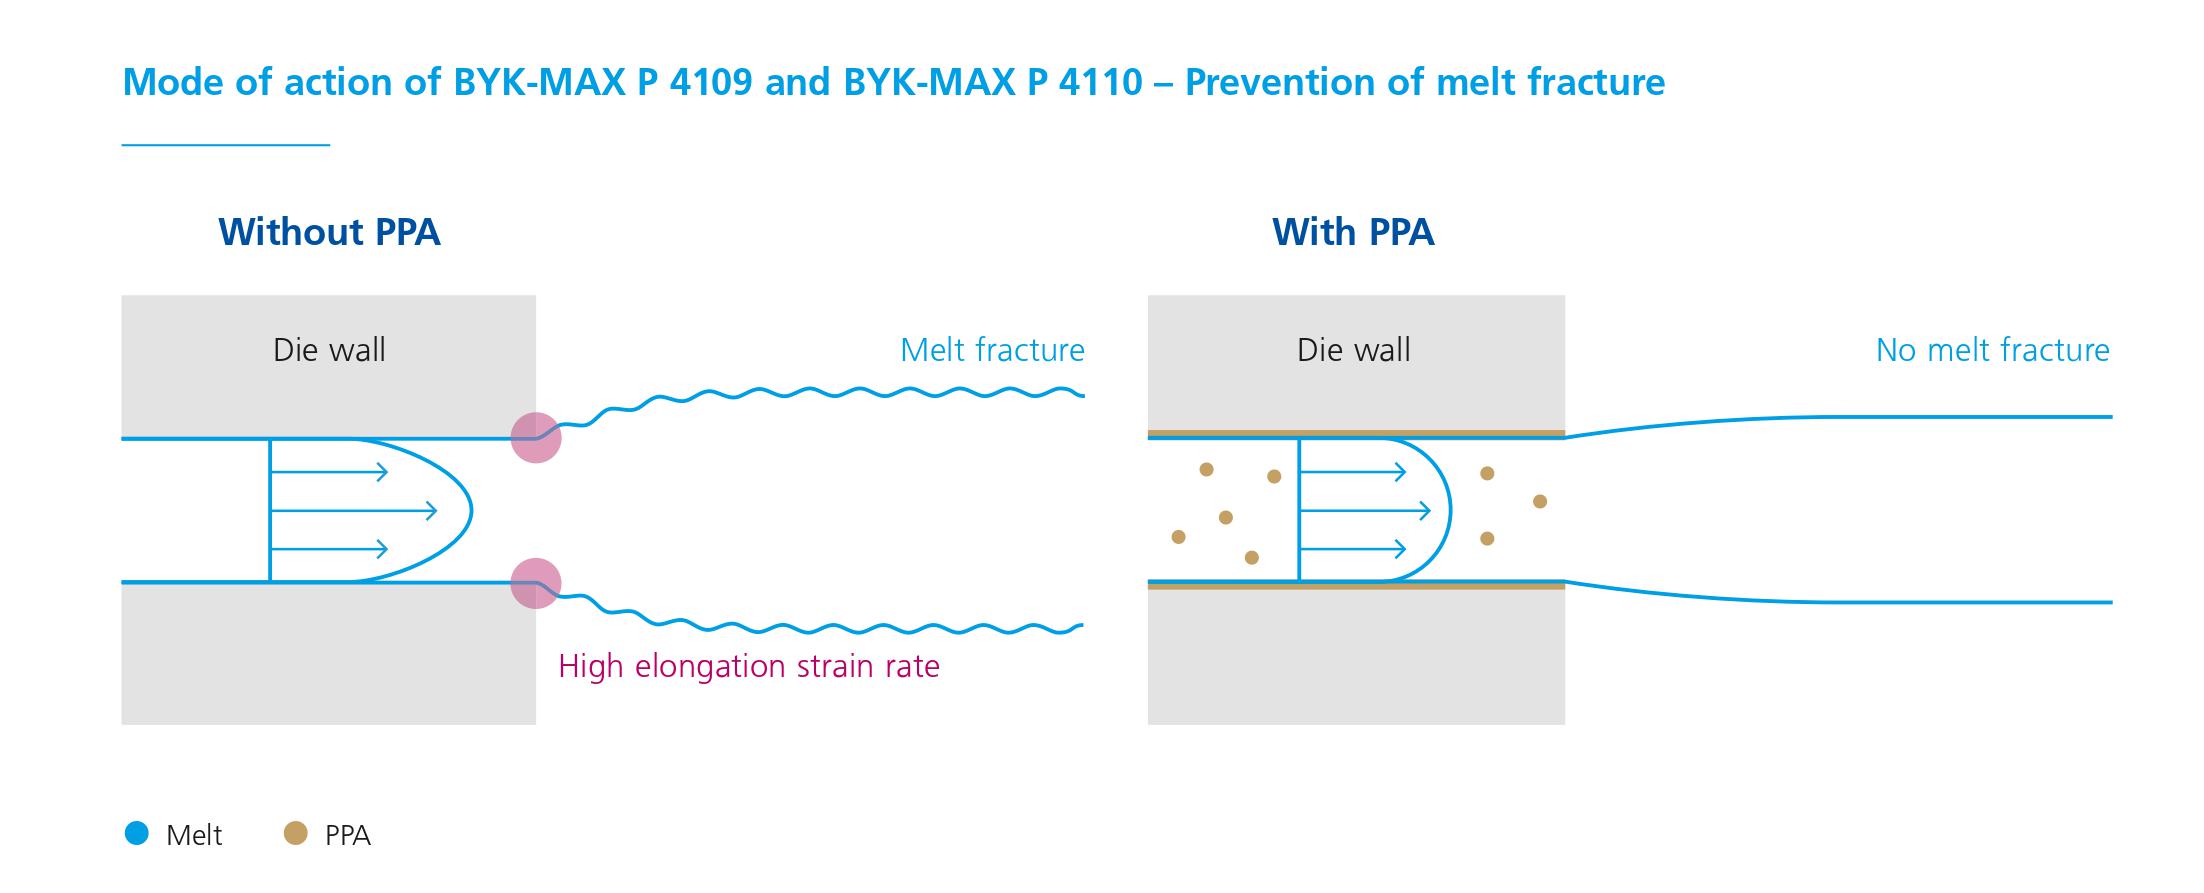 Mode of action of BYK-MAX P 4109 and P 4110